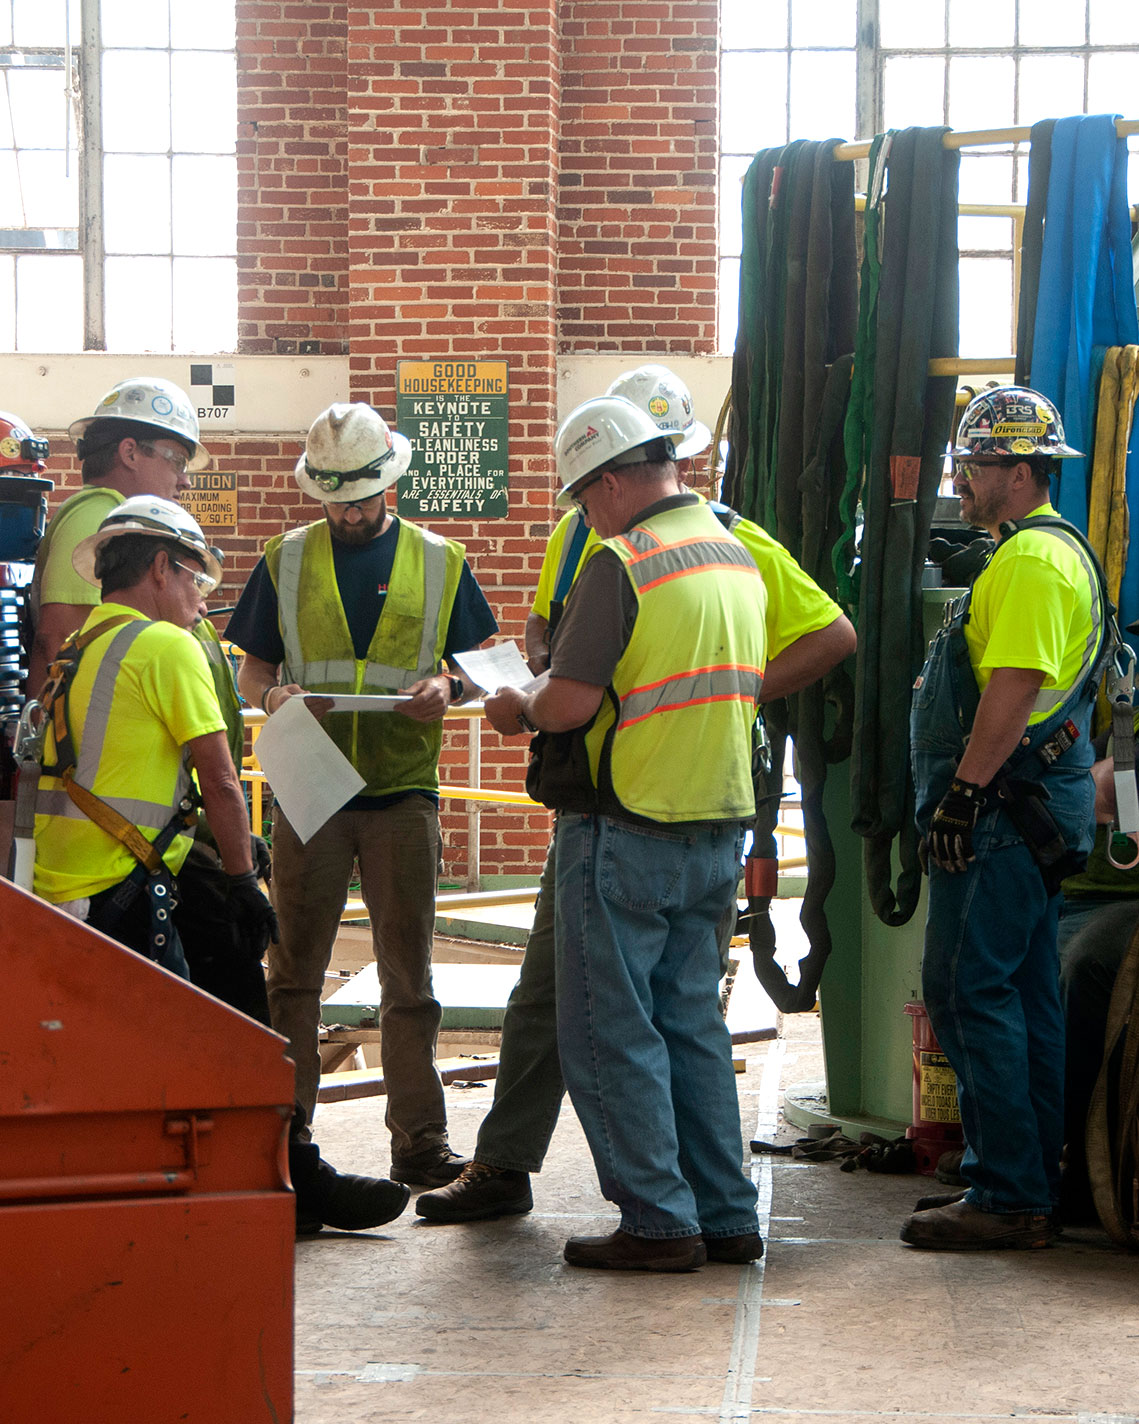 group of men in safety vests and hard hats